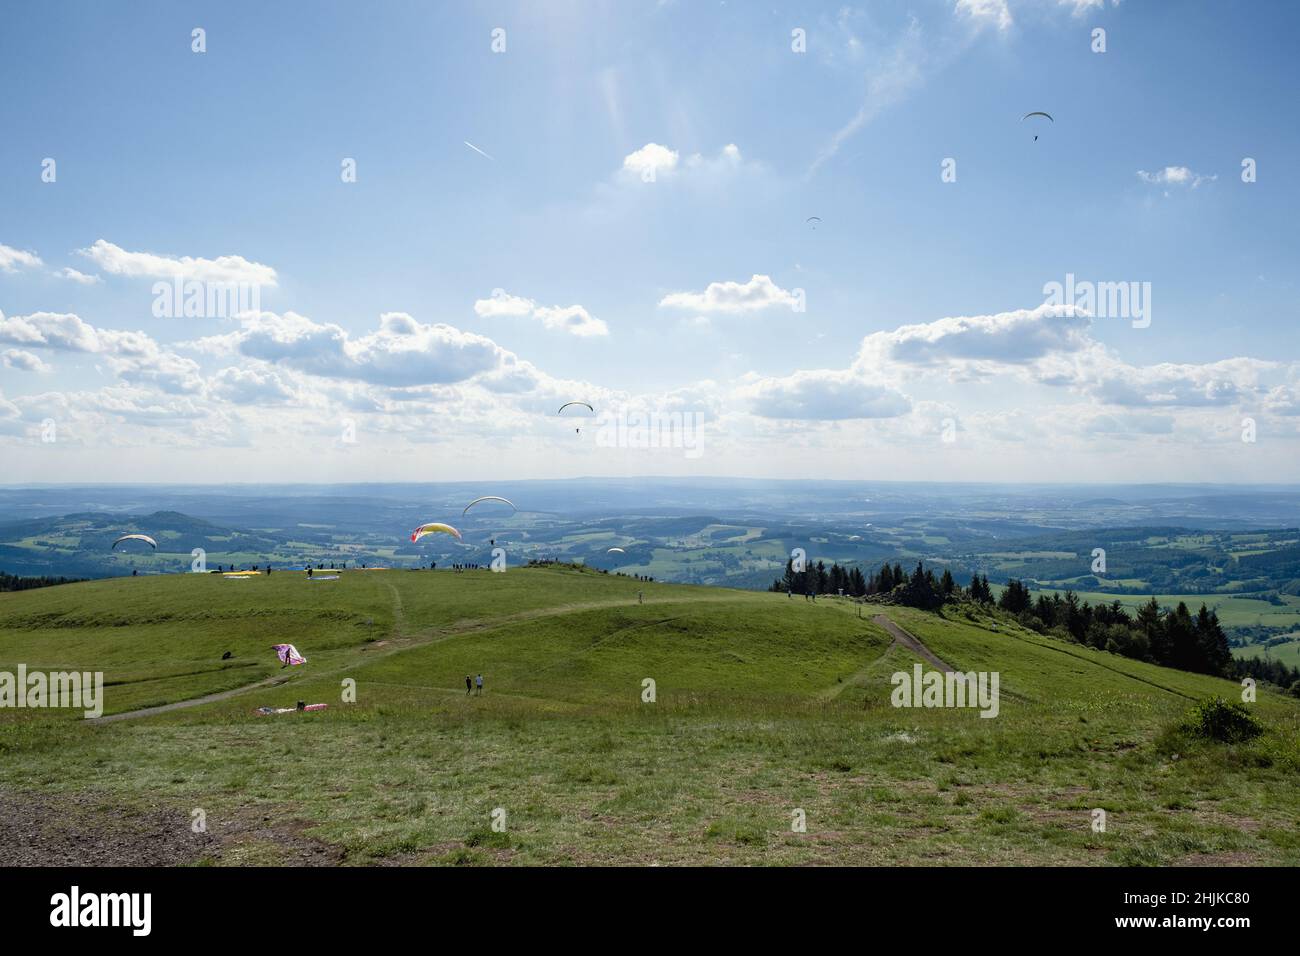 View from the hill Wasserkuppe in nature park Rhön Germany with paragliding on the ground and in the air. Stock Photo